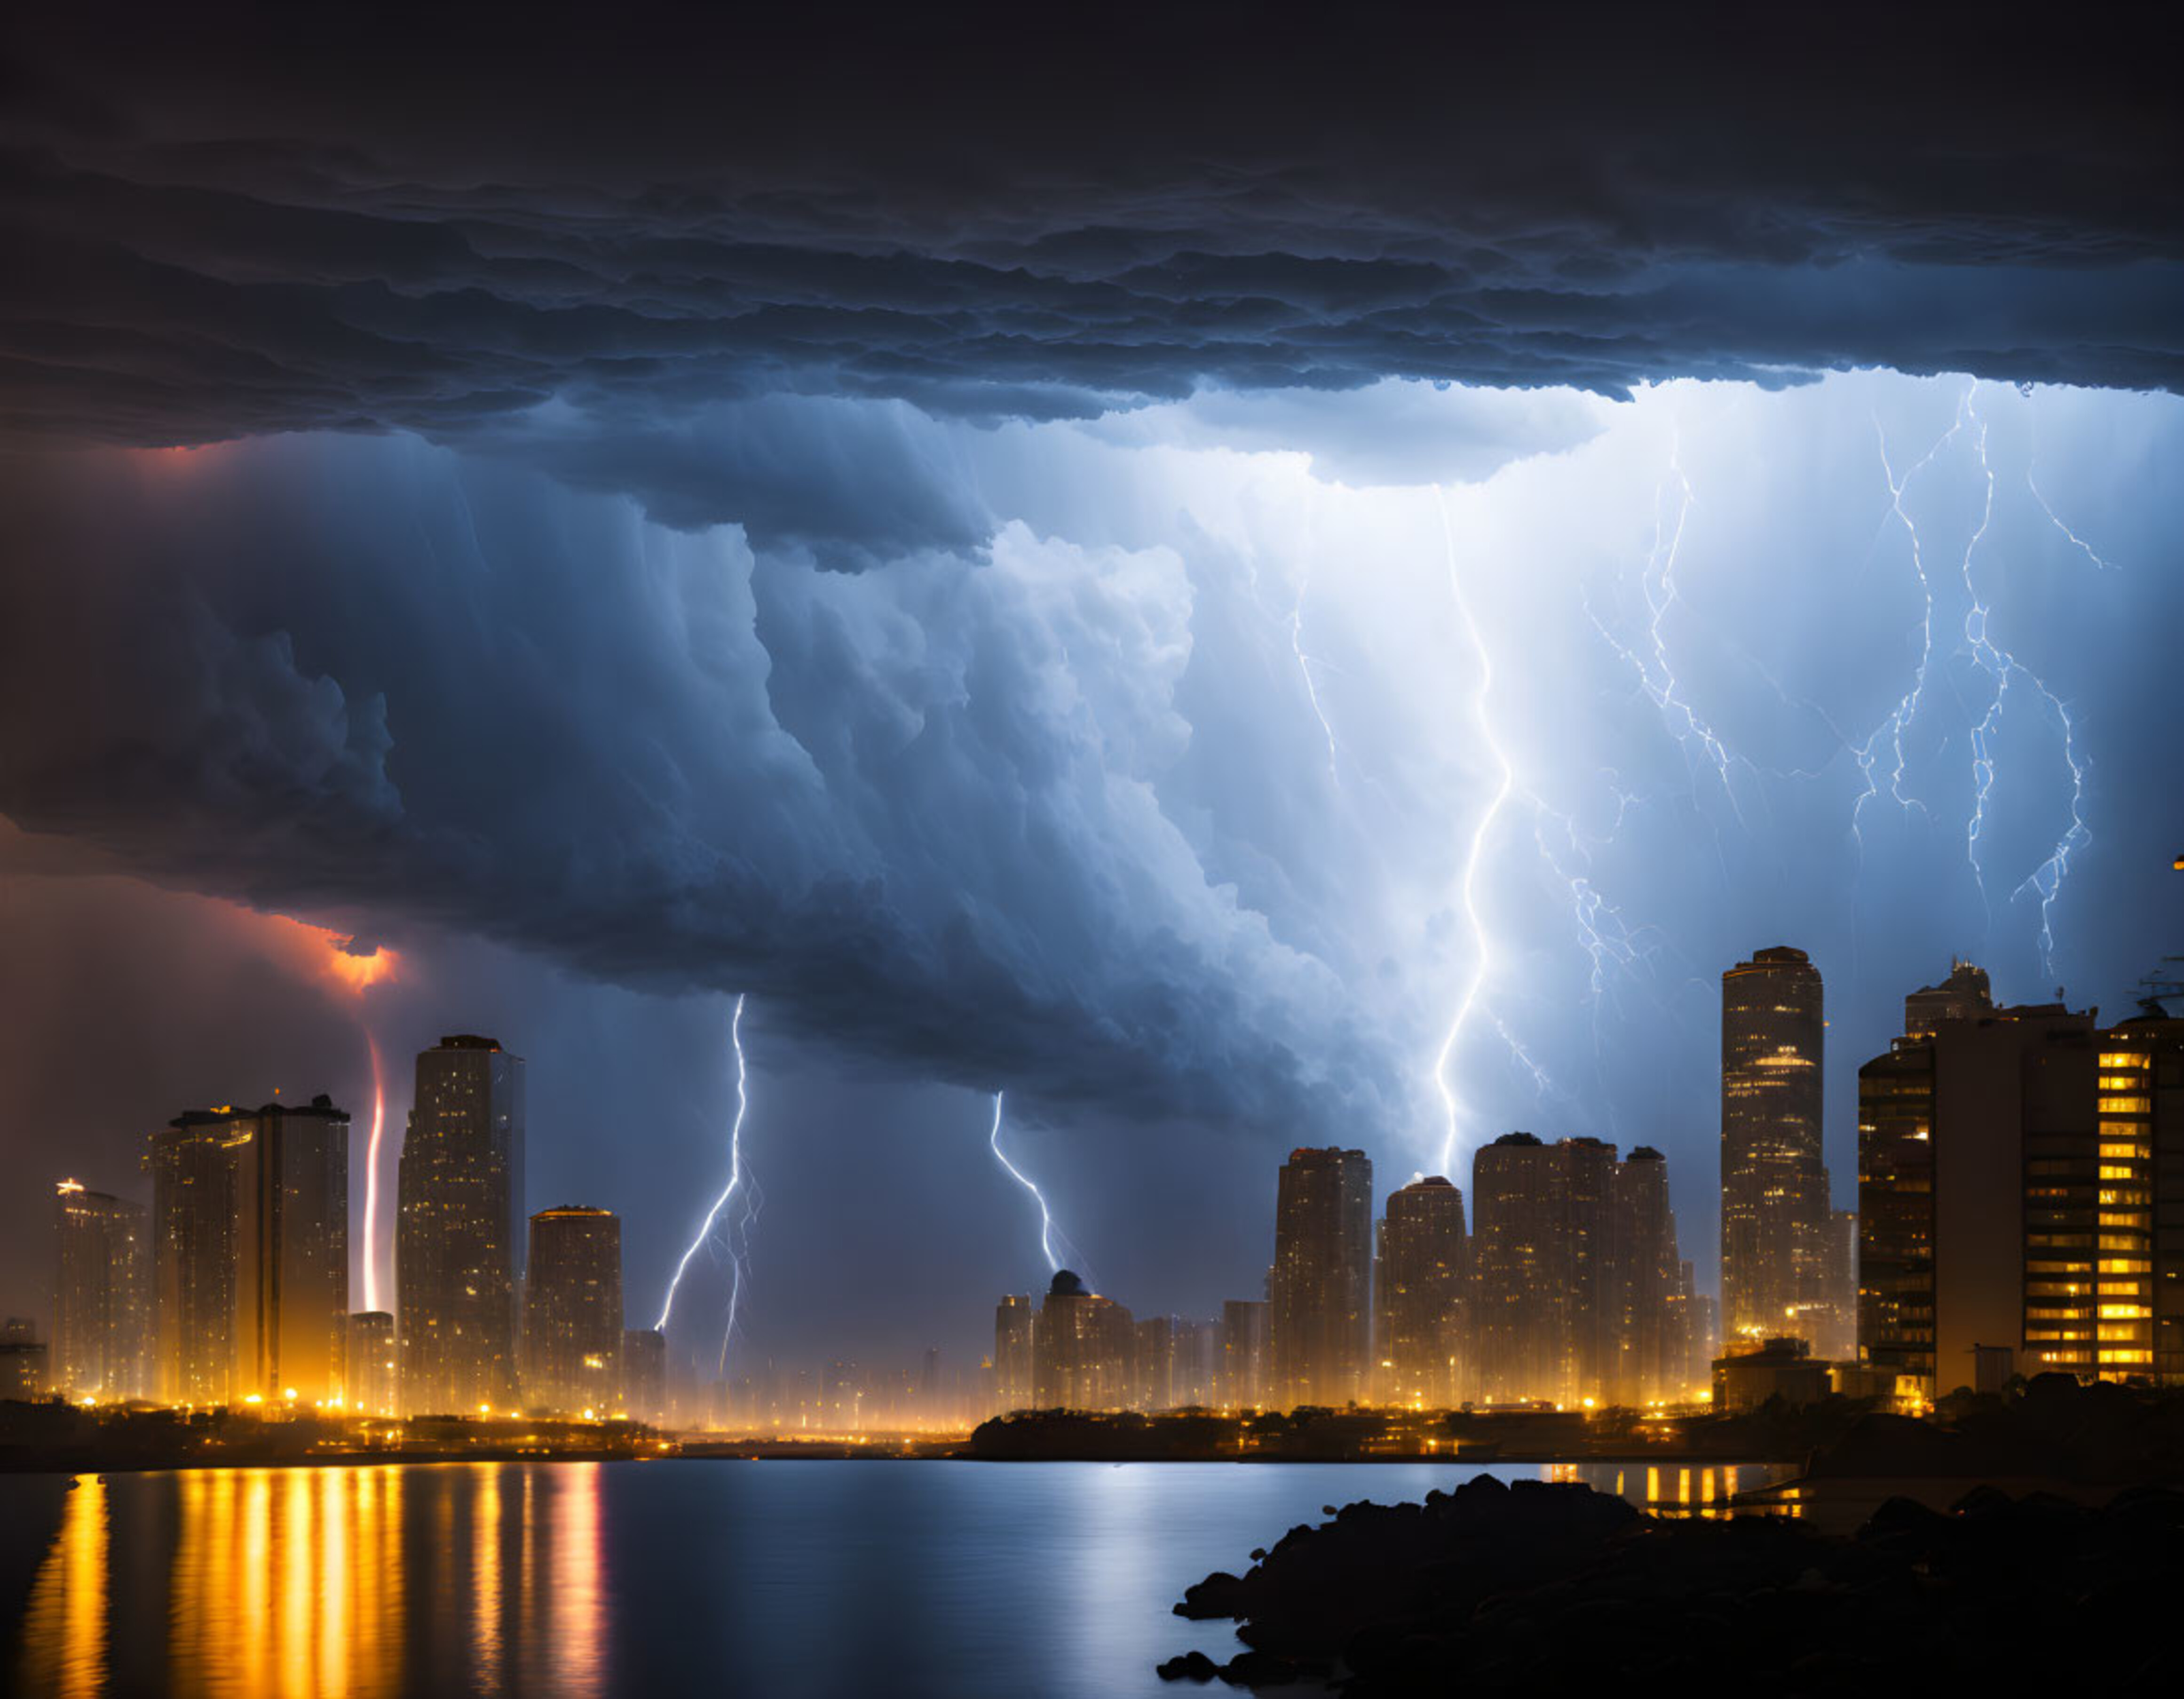 A thunderstorm in the city at night